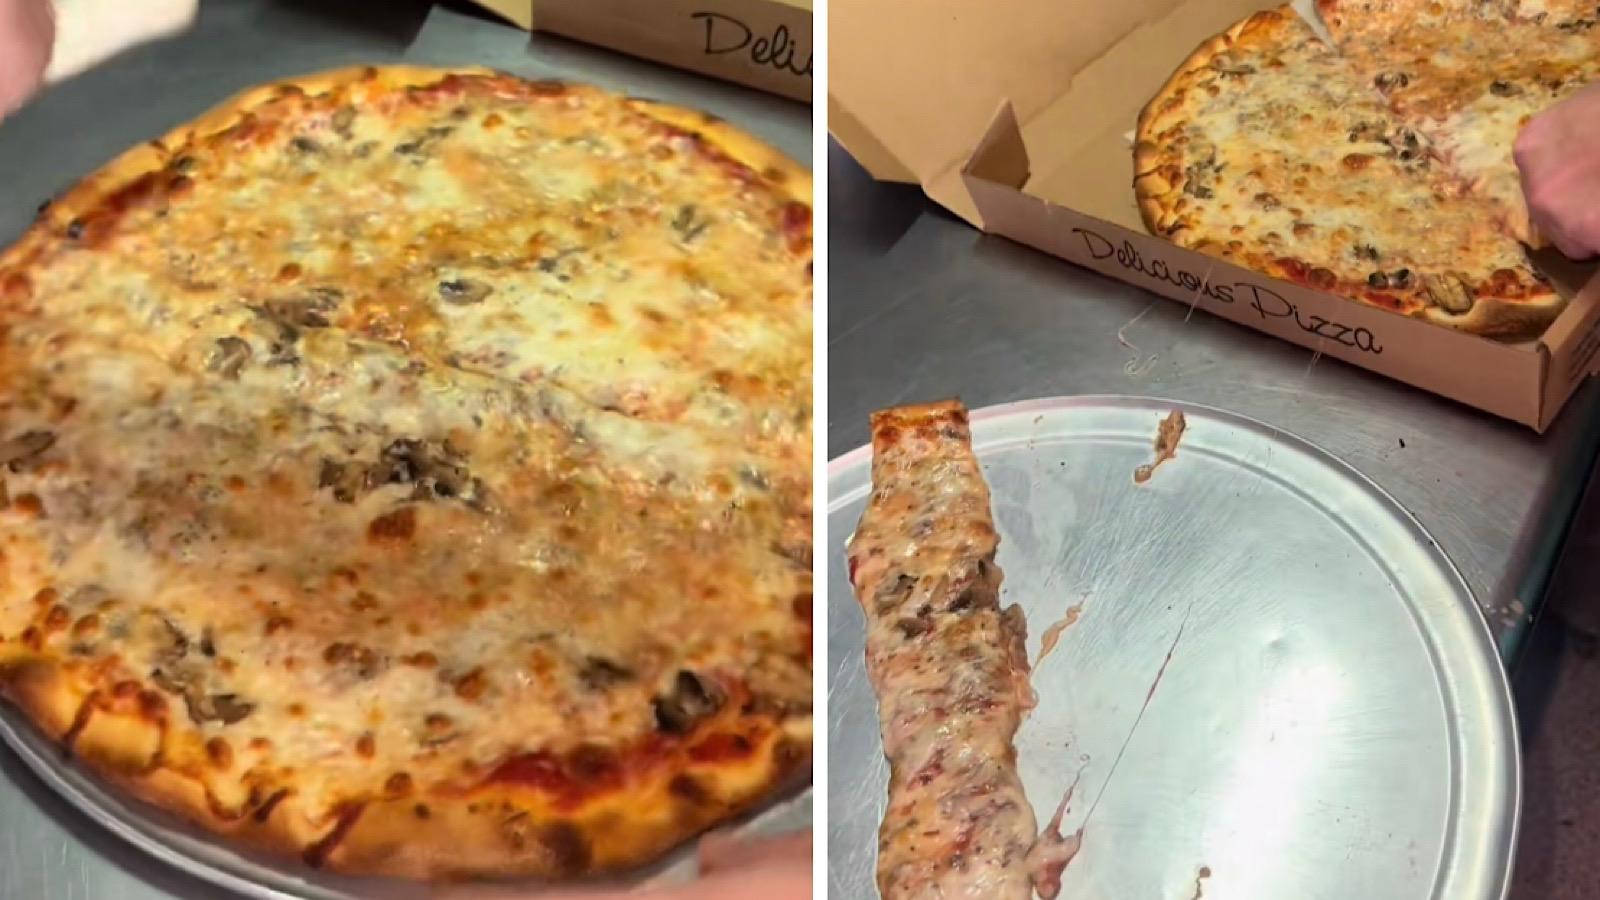 pizza chef reveals how to steal slices without customers knowing